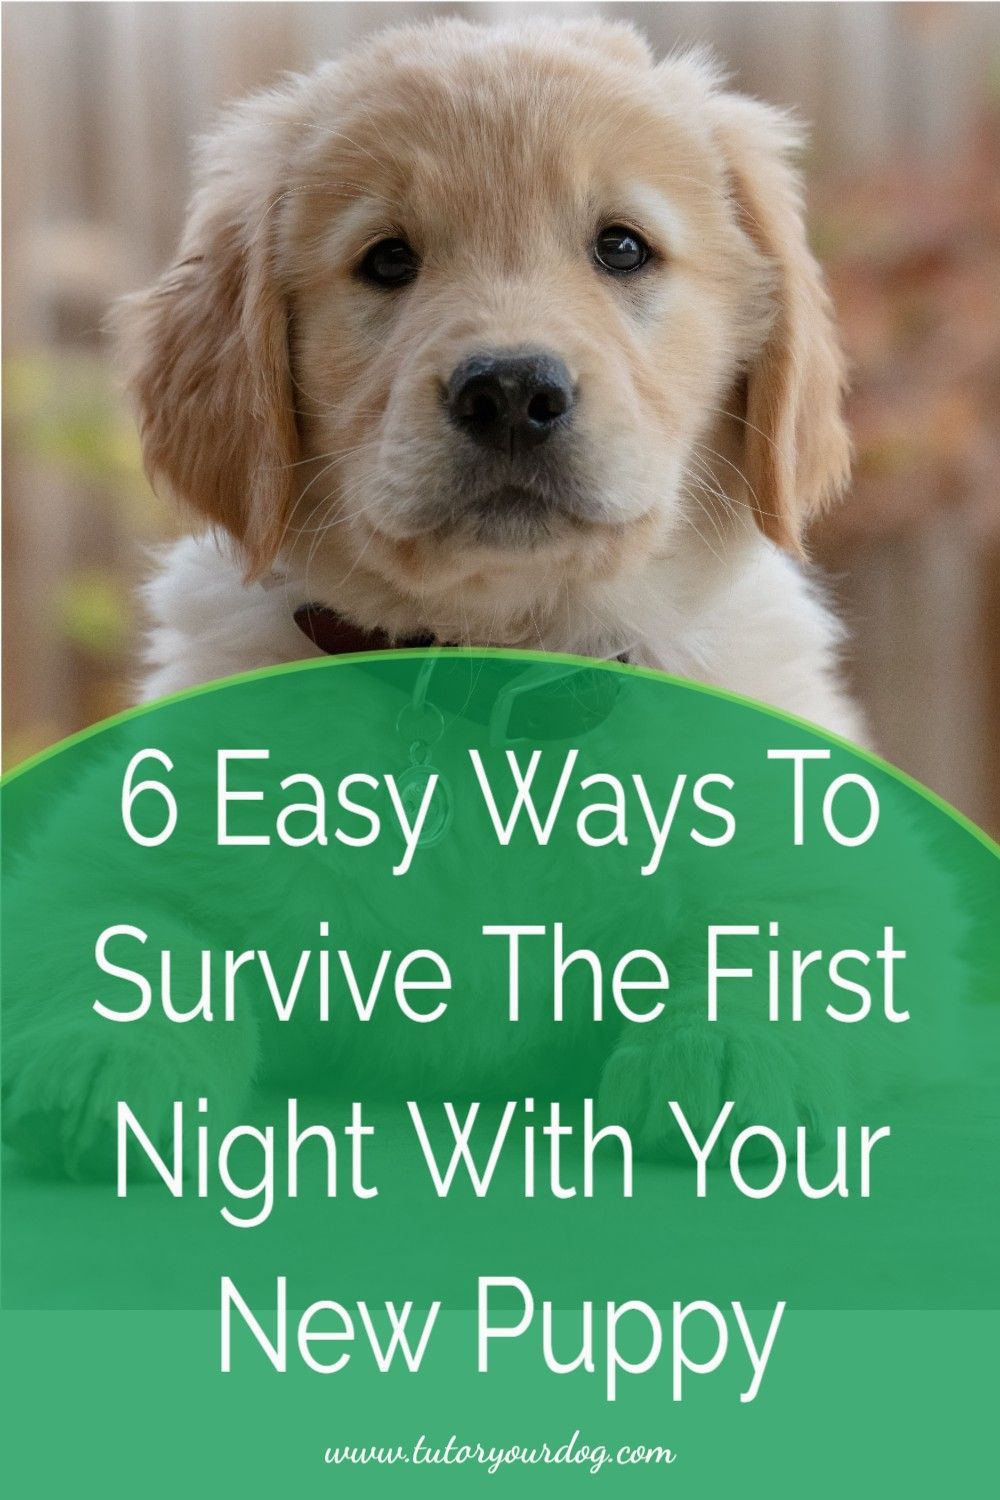 6 Simple Tips For Surviving The First Night With Your New Puppy - Tutor Your Dog